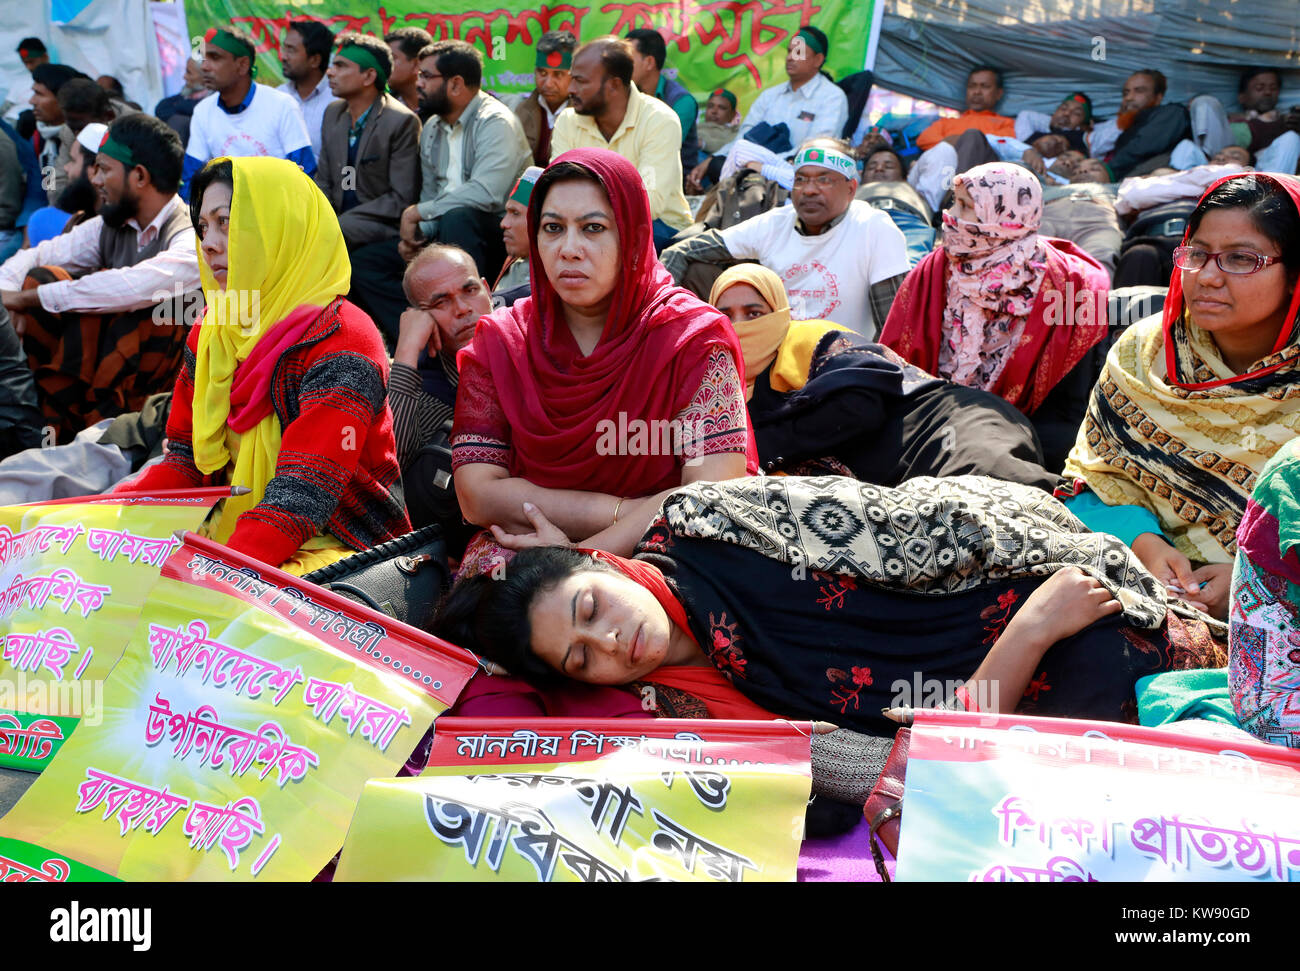 Dhaka, Bangladesh. 01st Jan, 2018. Teachers and employees of non-MPO educational institutions, who have been demonstrating for enlistment under the government's MPO facilities, start fast unto death in front of the National Press Club in Dhaka, Bangladesh. Credit: SK Hasan Ali/Alamy Live News Stock Photo